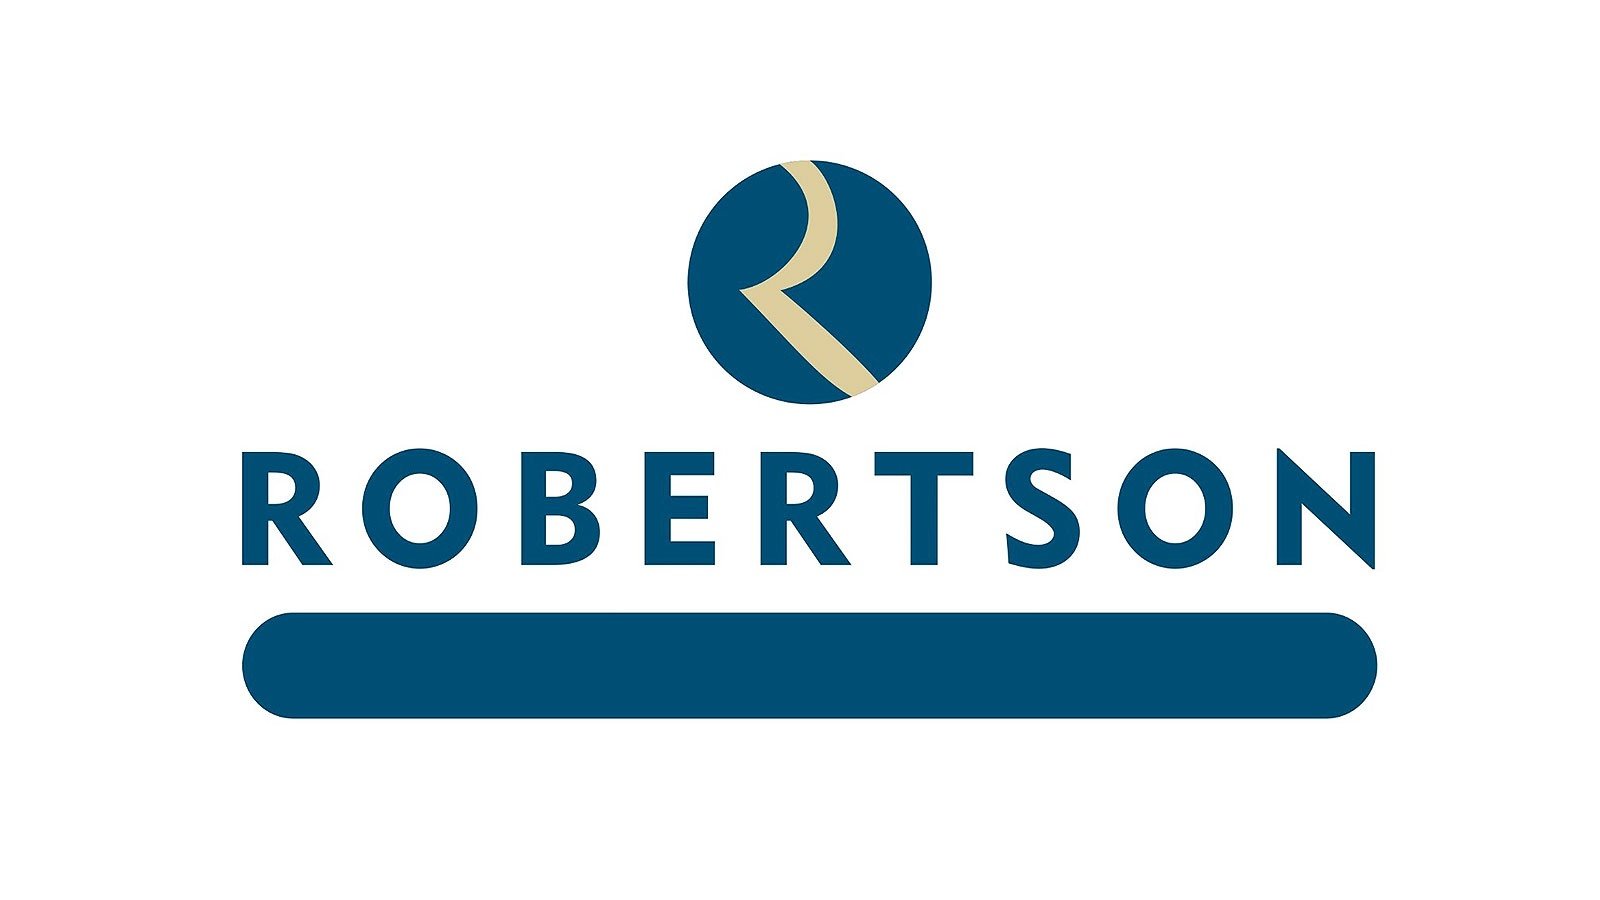 Robertson selects Adoddle as their Project Information Management CDE tool and signs an Enterprise Agreement with Asite